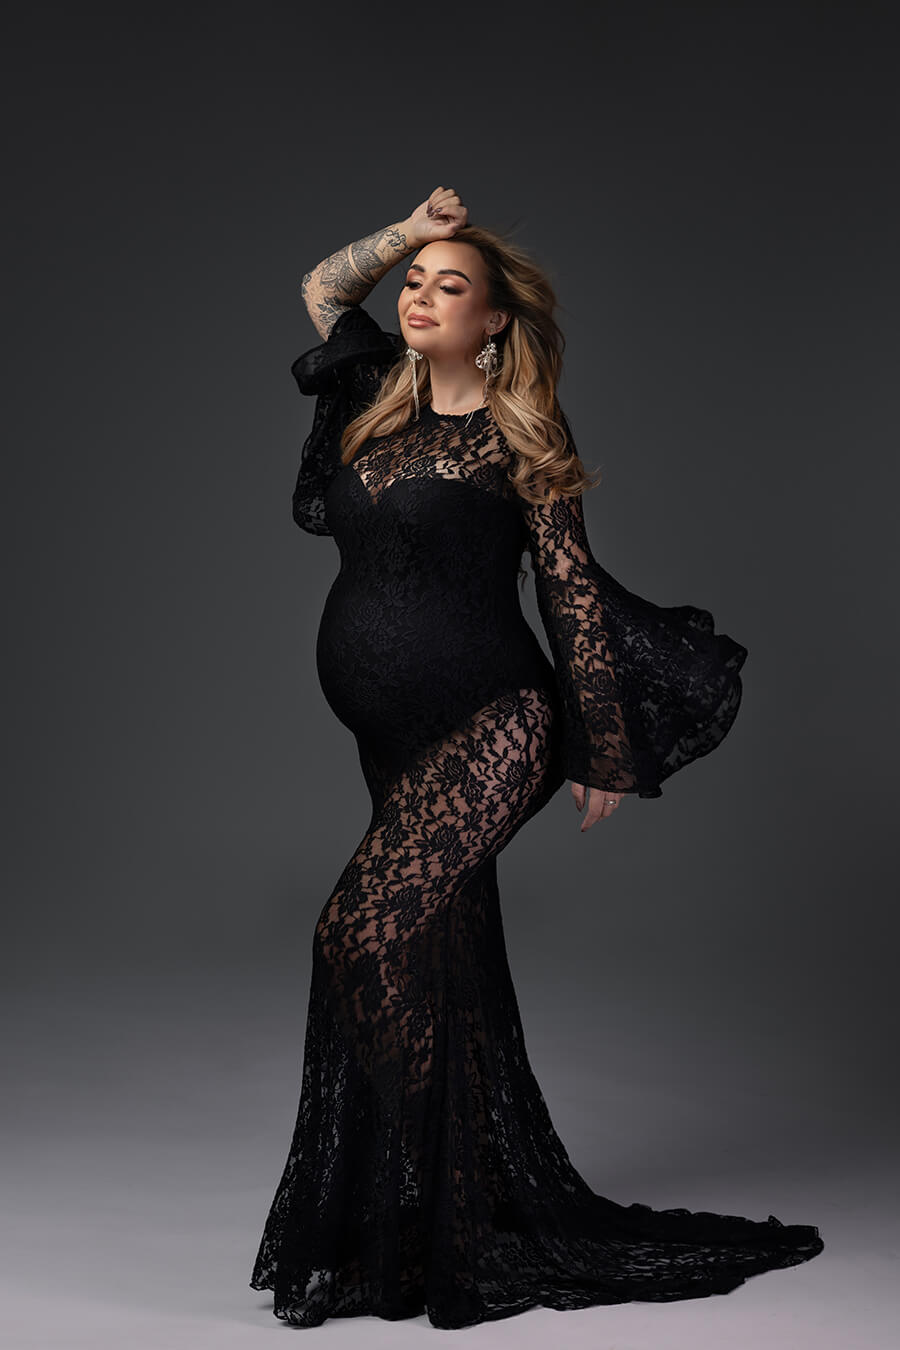 blond pregnant model poses in a studio wearing a long lace dress with bell sleeves and a bodysuit under